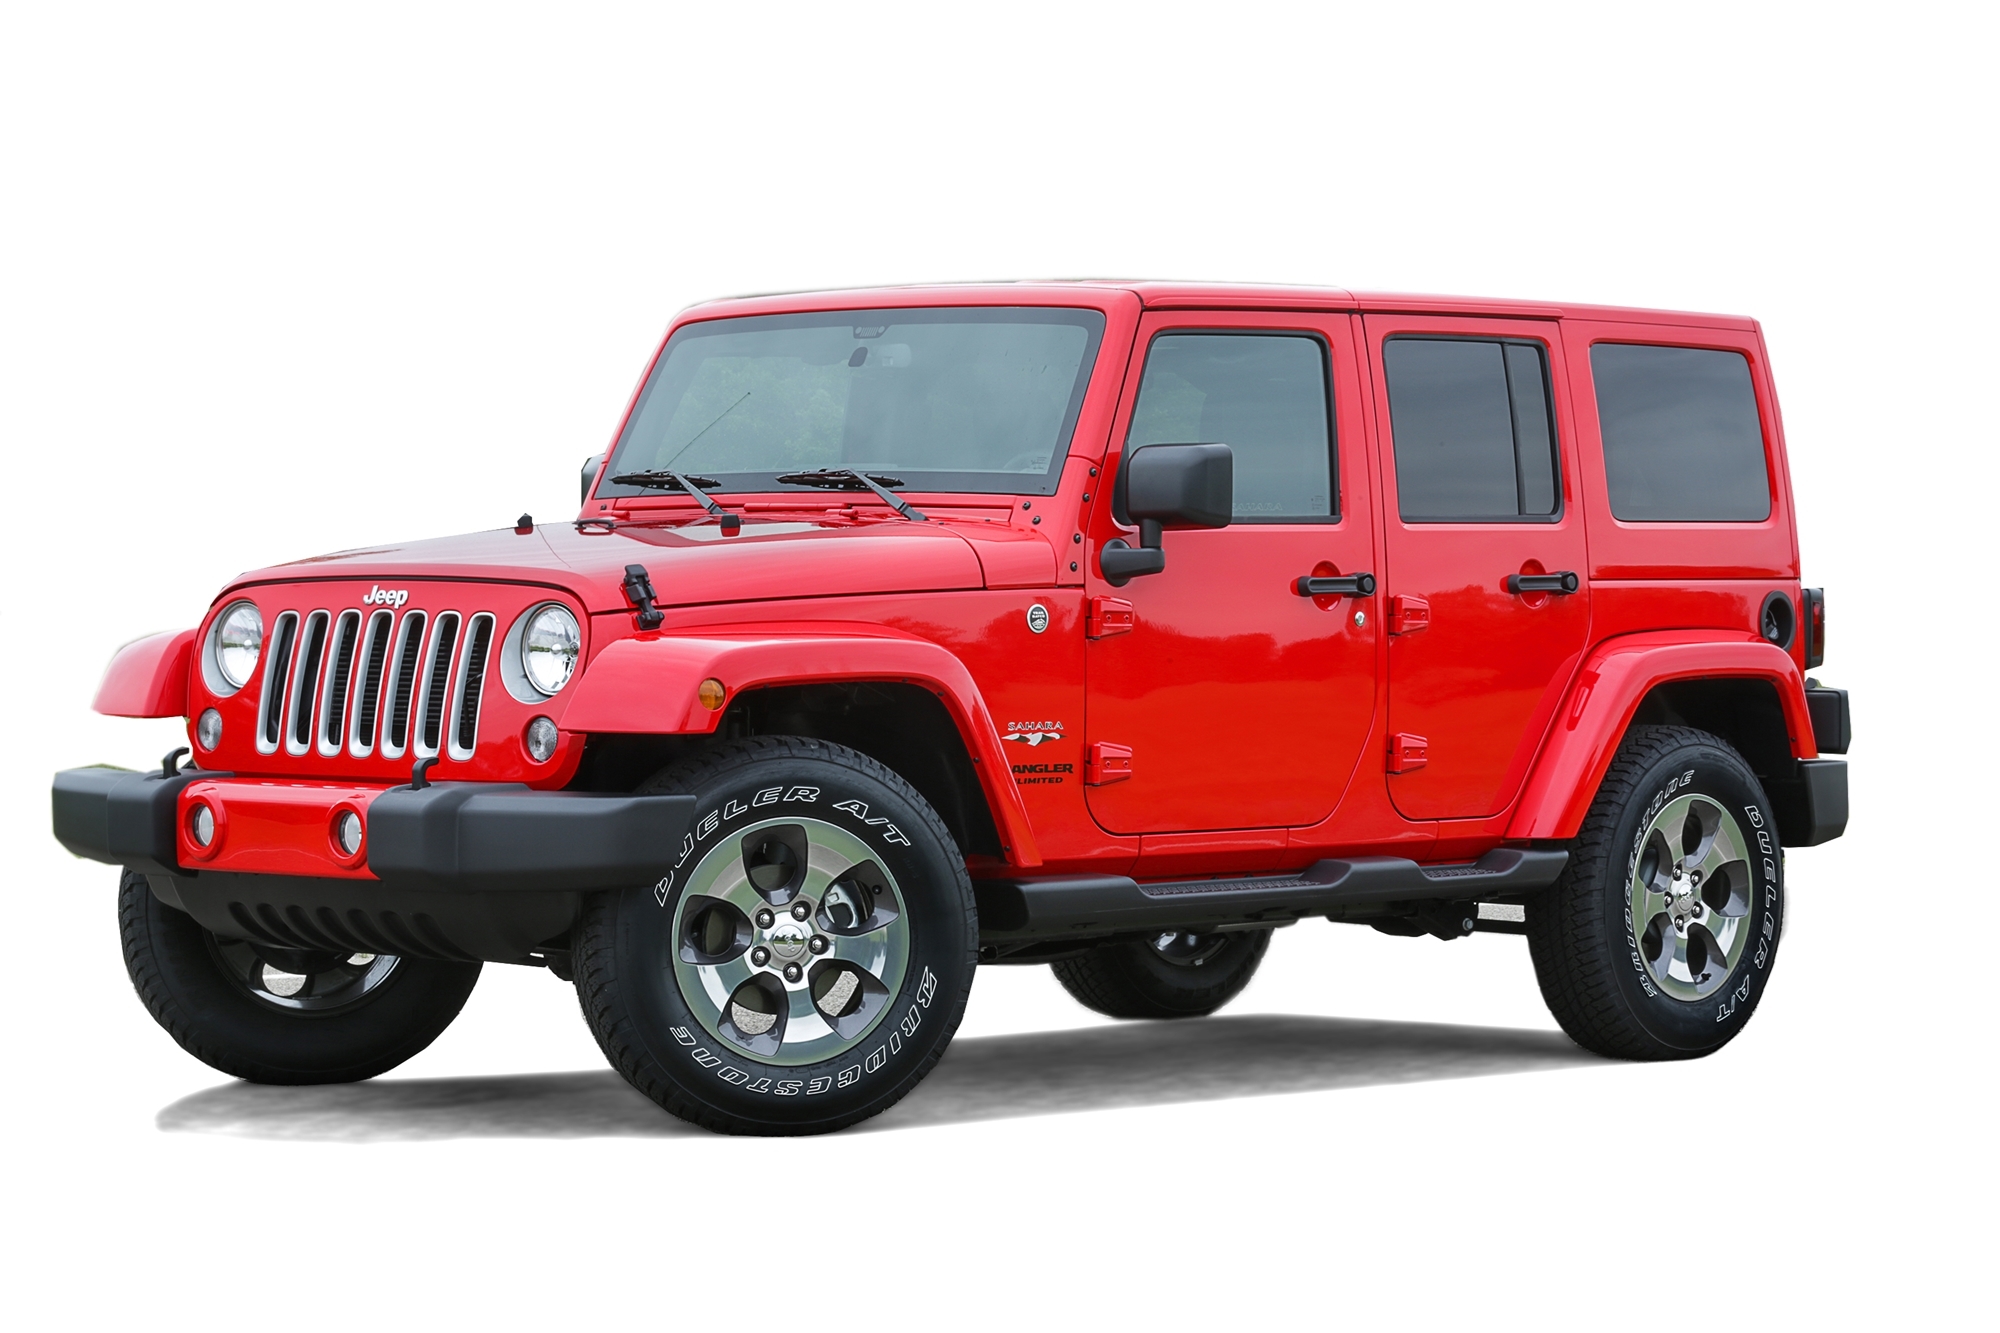 2017 Jeep Wrangler Unlimited Chief Edition Full Specs, Features and Price |  CarBuzz